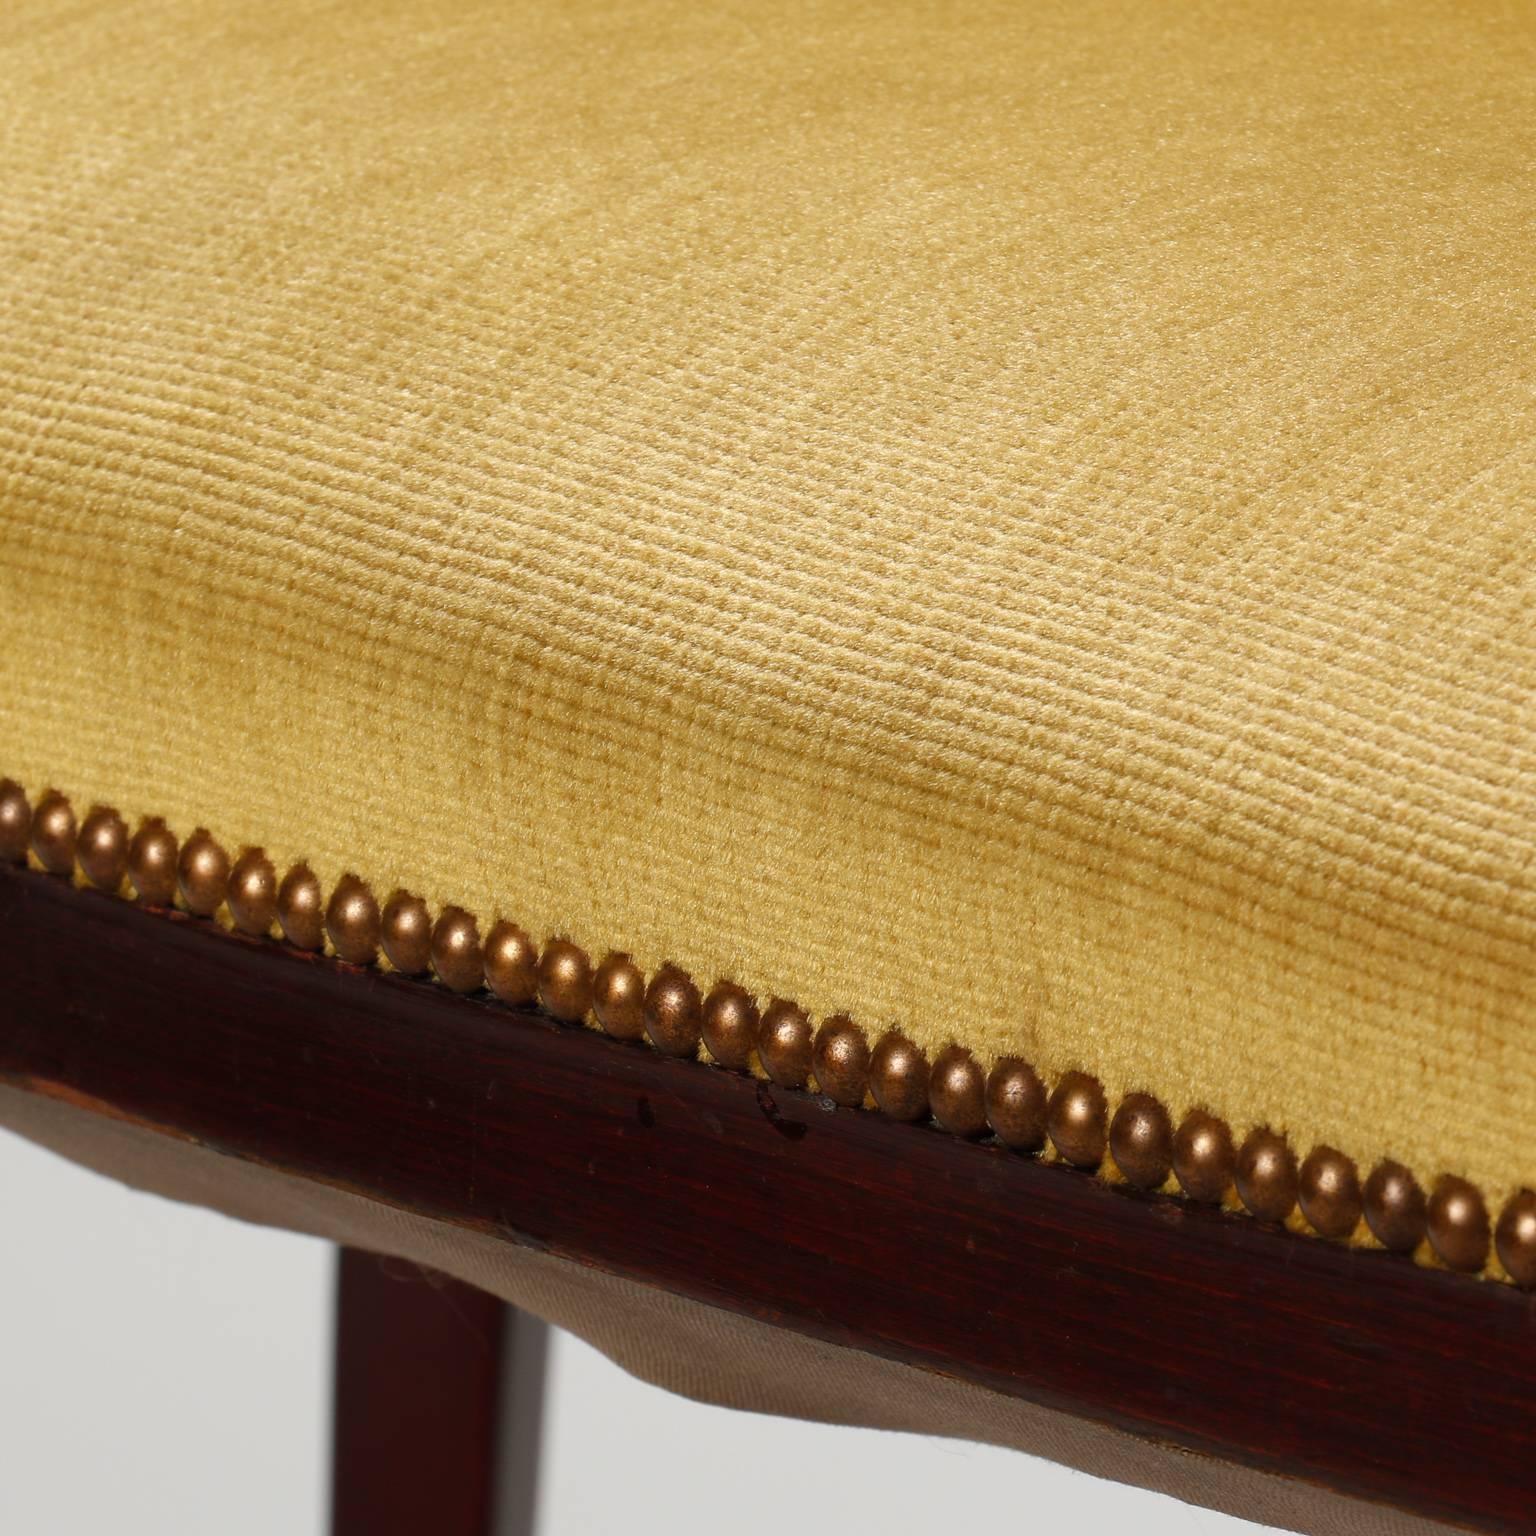 Thonet Settee with Mustard Color Fabric 1